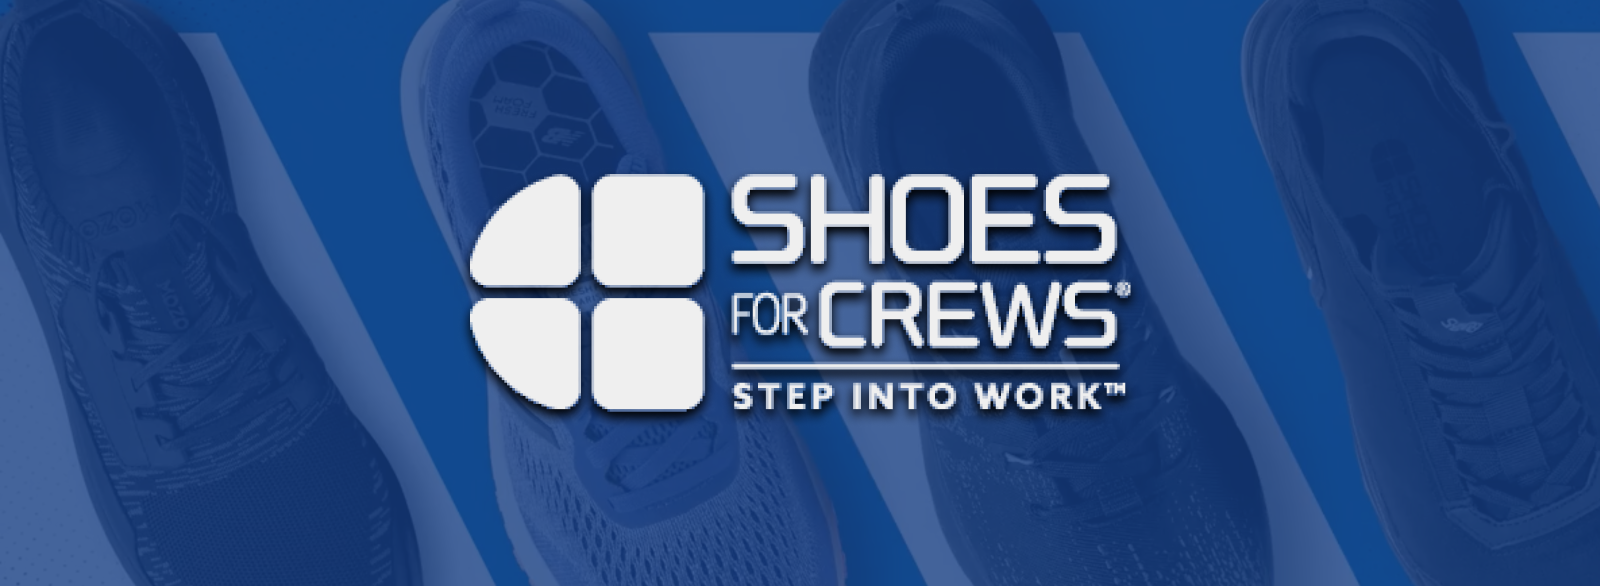 shoes-for-crews-case-study-banner